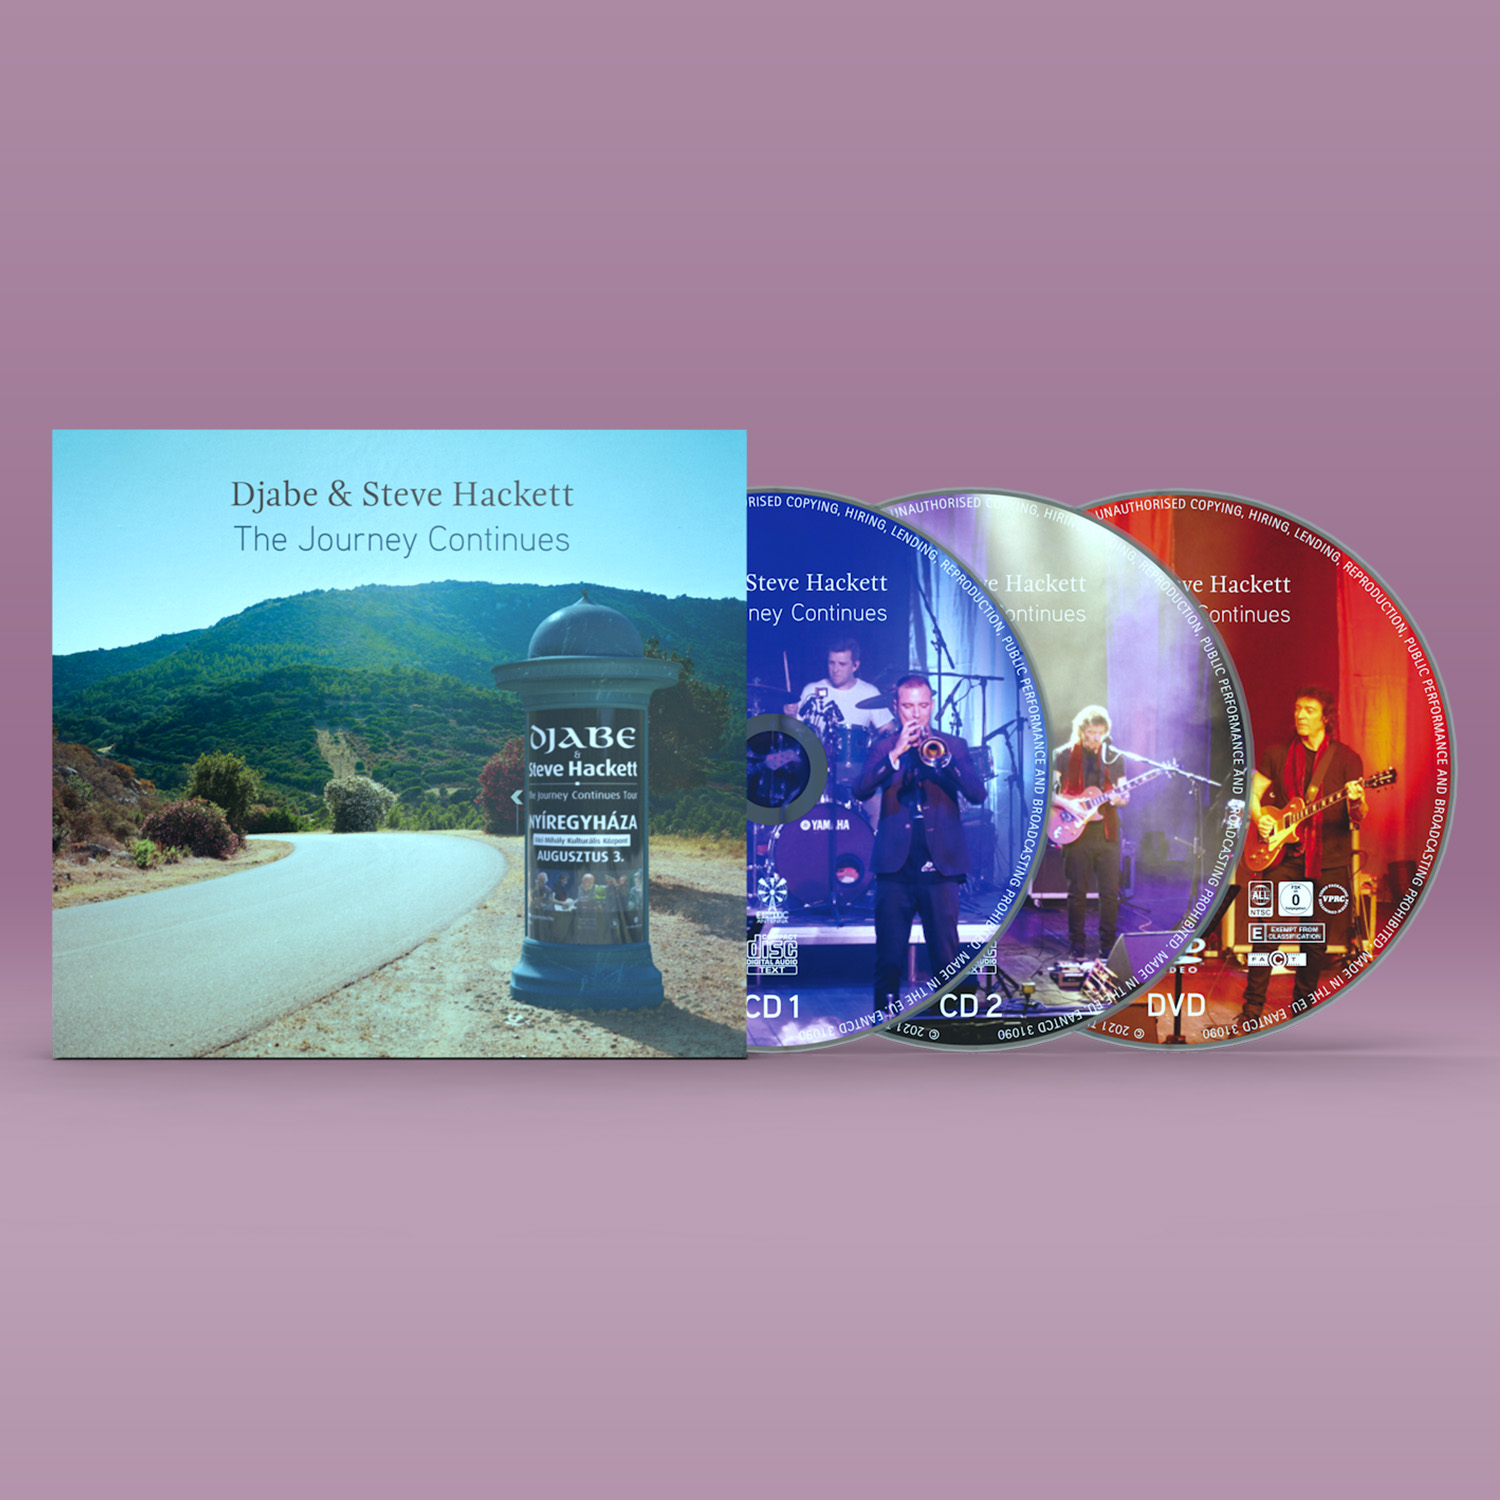 Djabe & Steve Hackett – The Journey Continues – 2CD/DVD